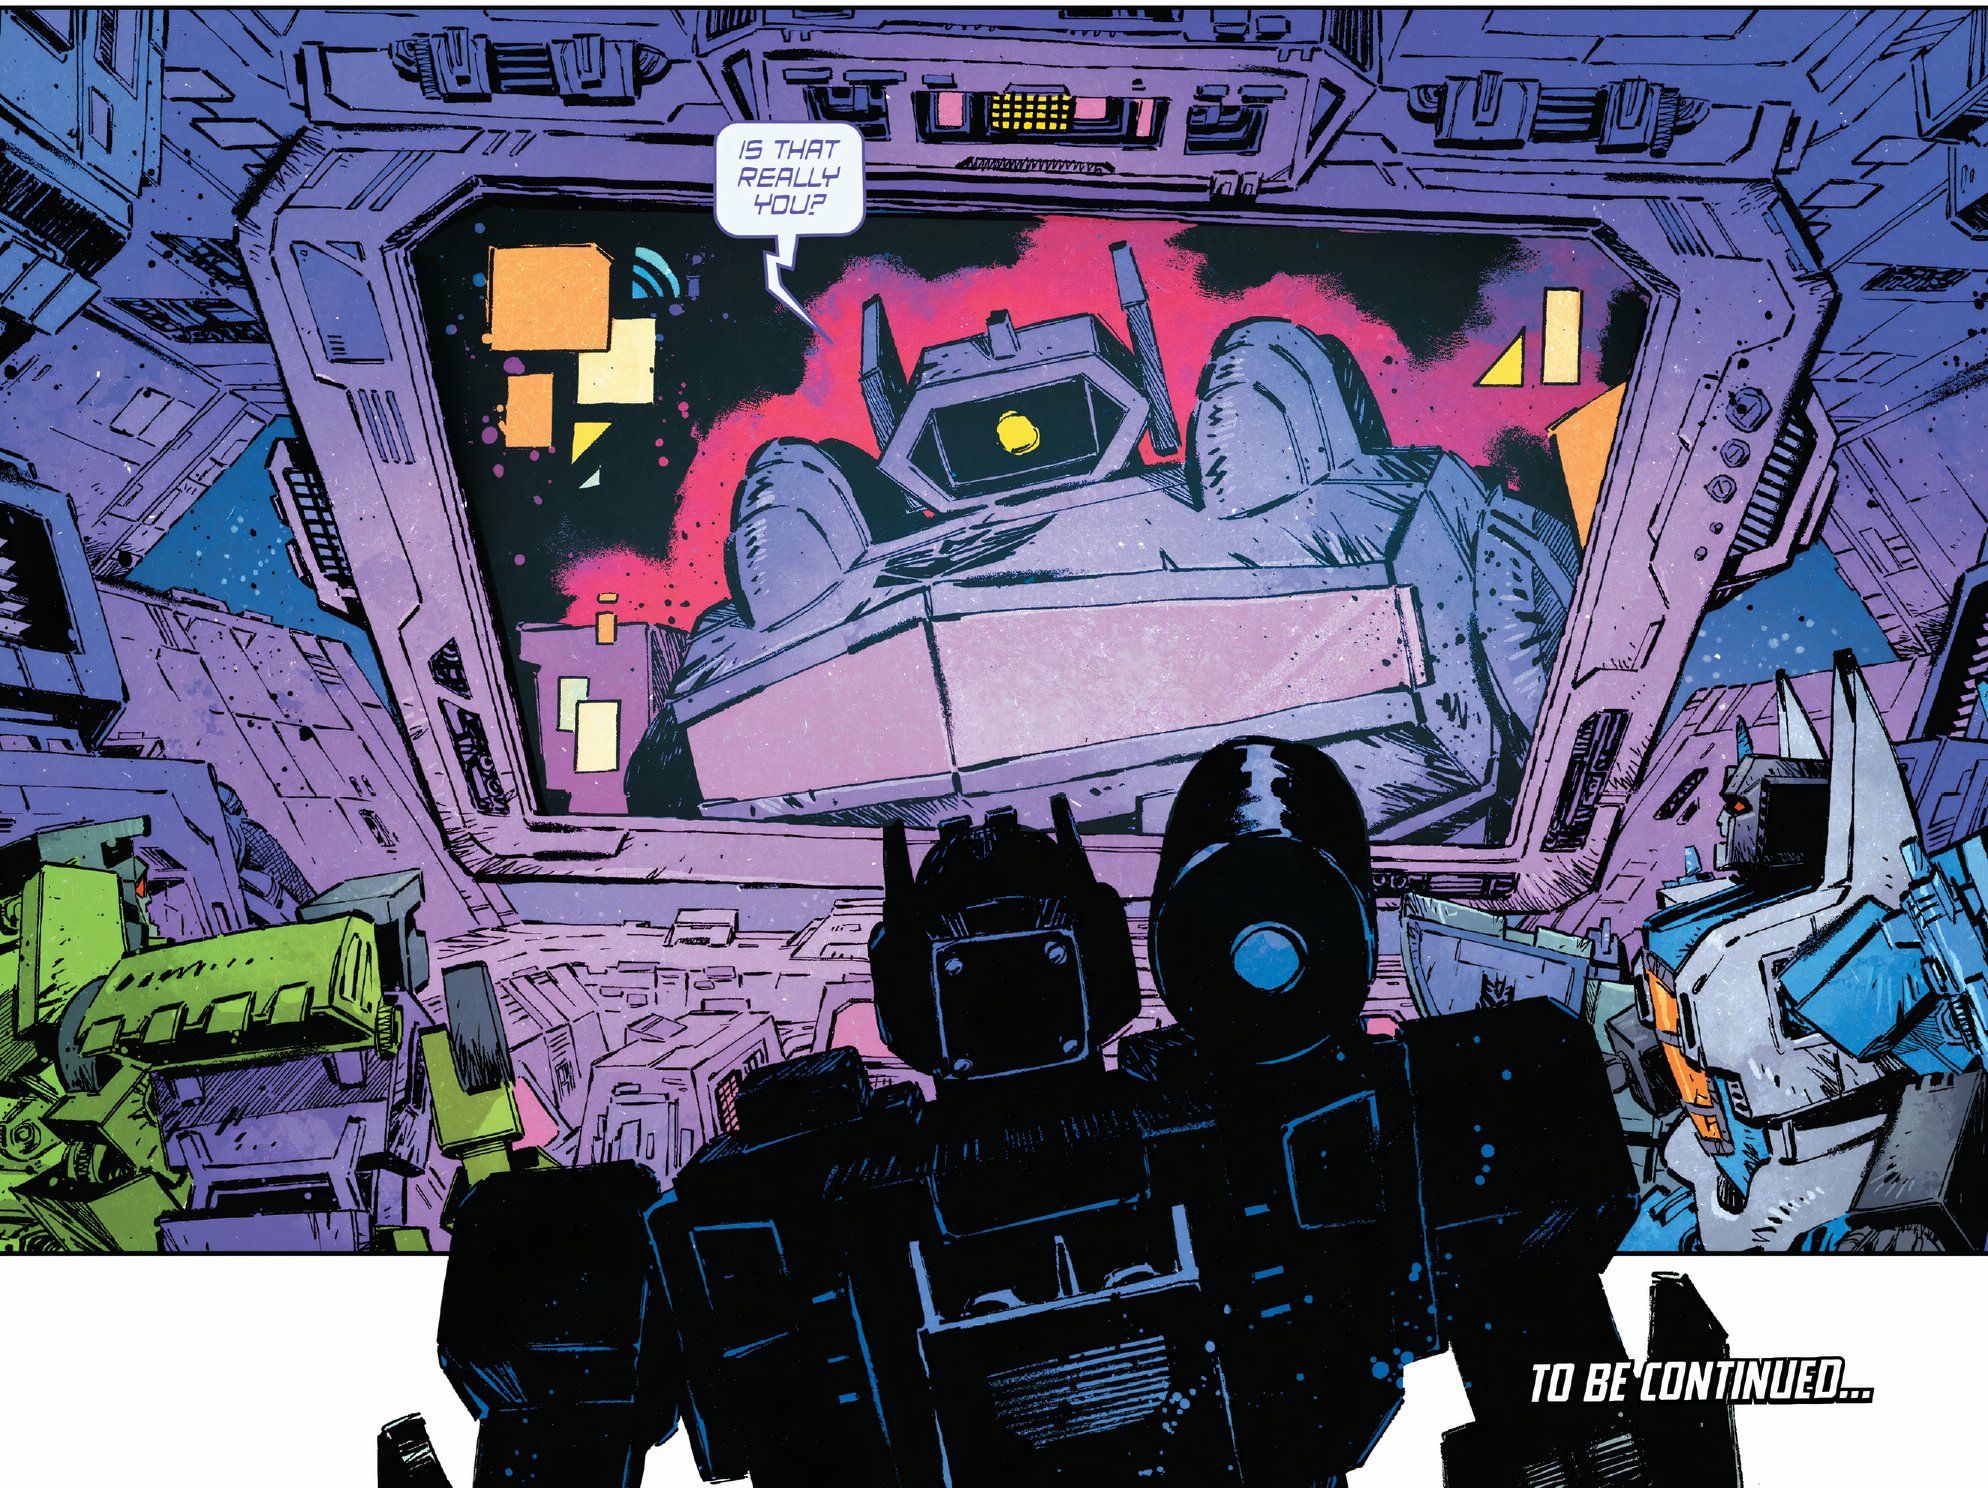 Transformers #8, Soundwave calls Shockwave and requests his presence on Earth.